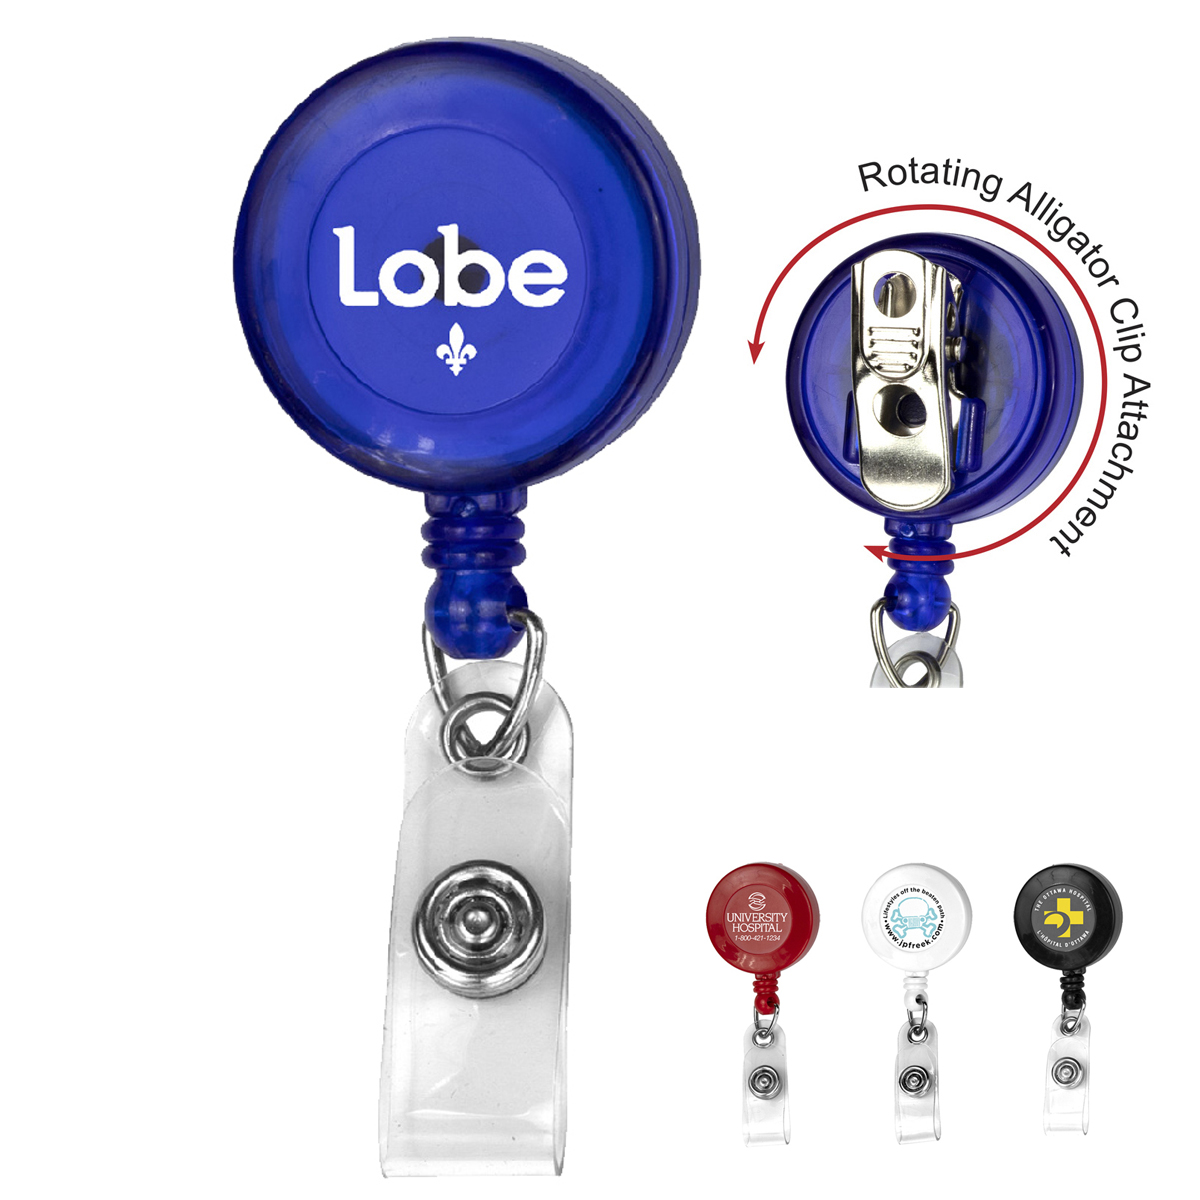 "Bellefontaine VL" 30” Cord Round Retractable Badge Reel and Badge Holder with Rotating Alligator Clip Attachment